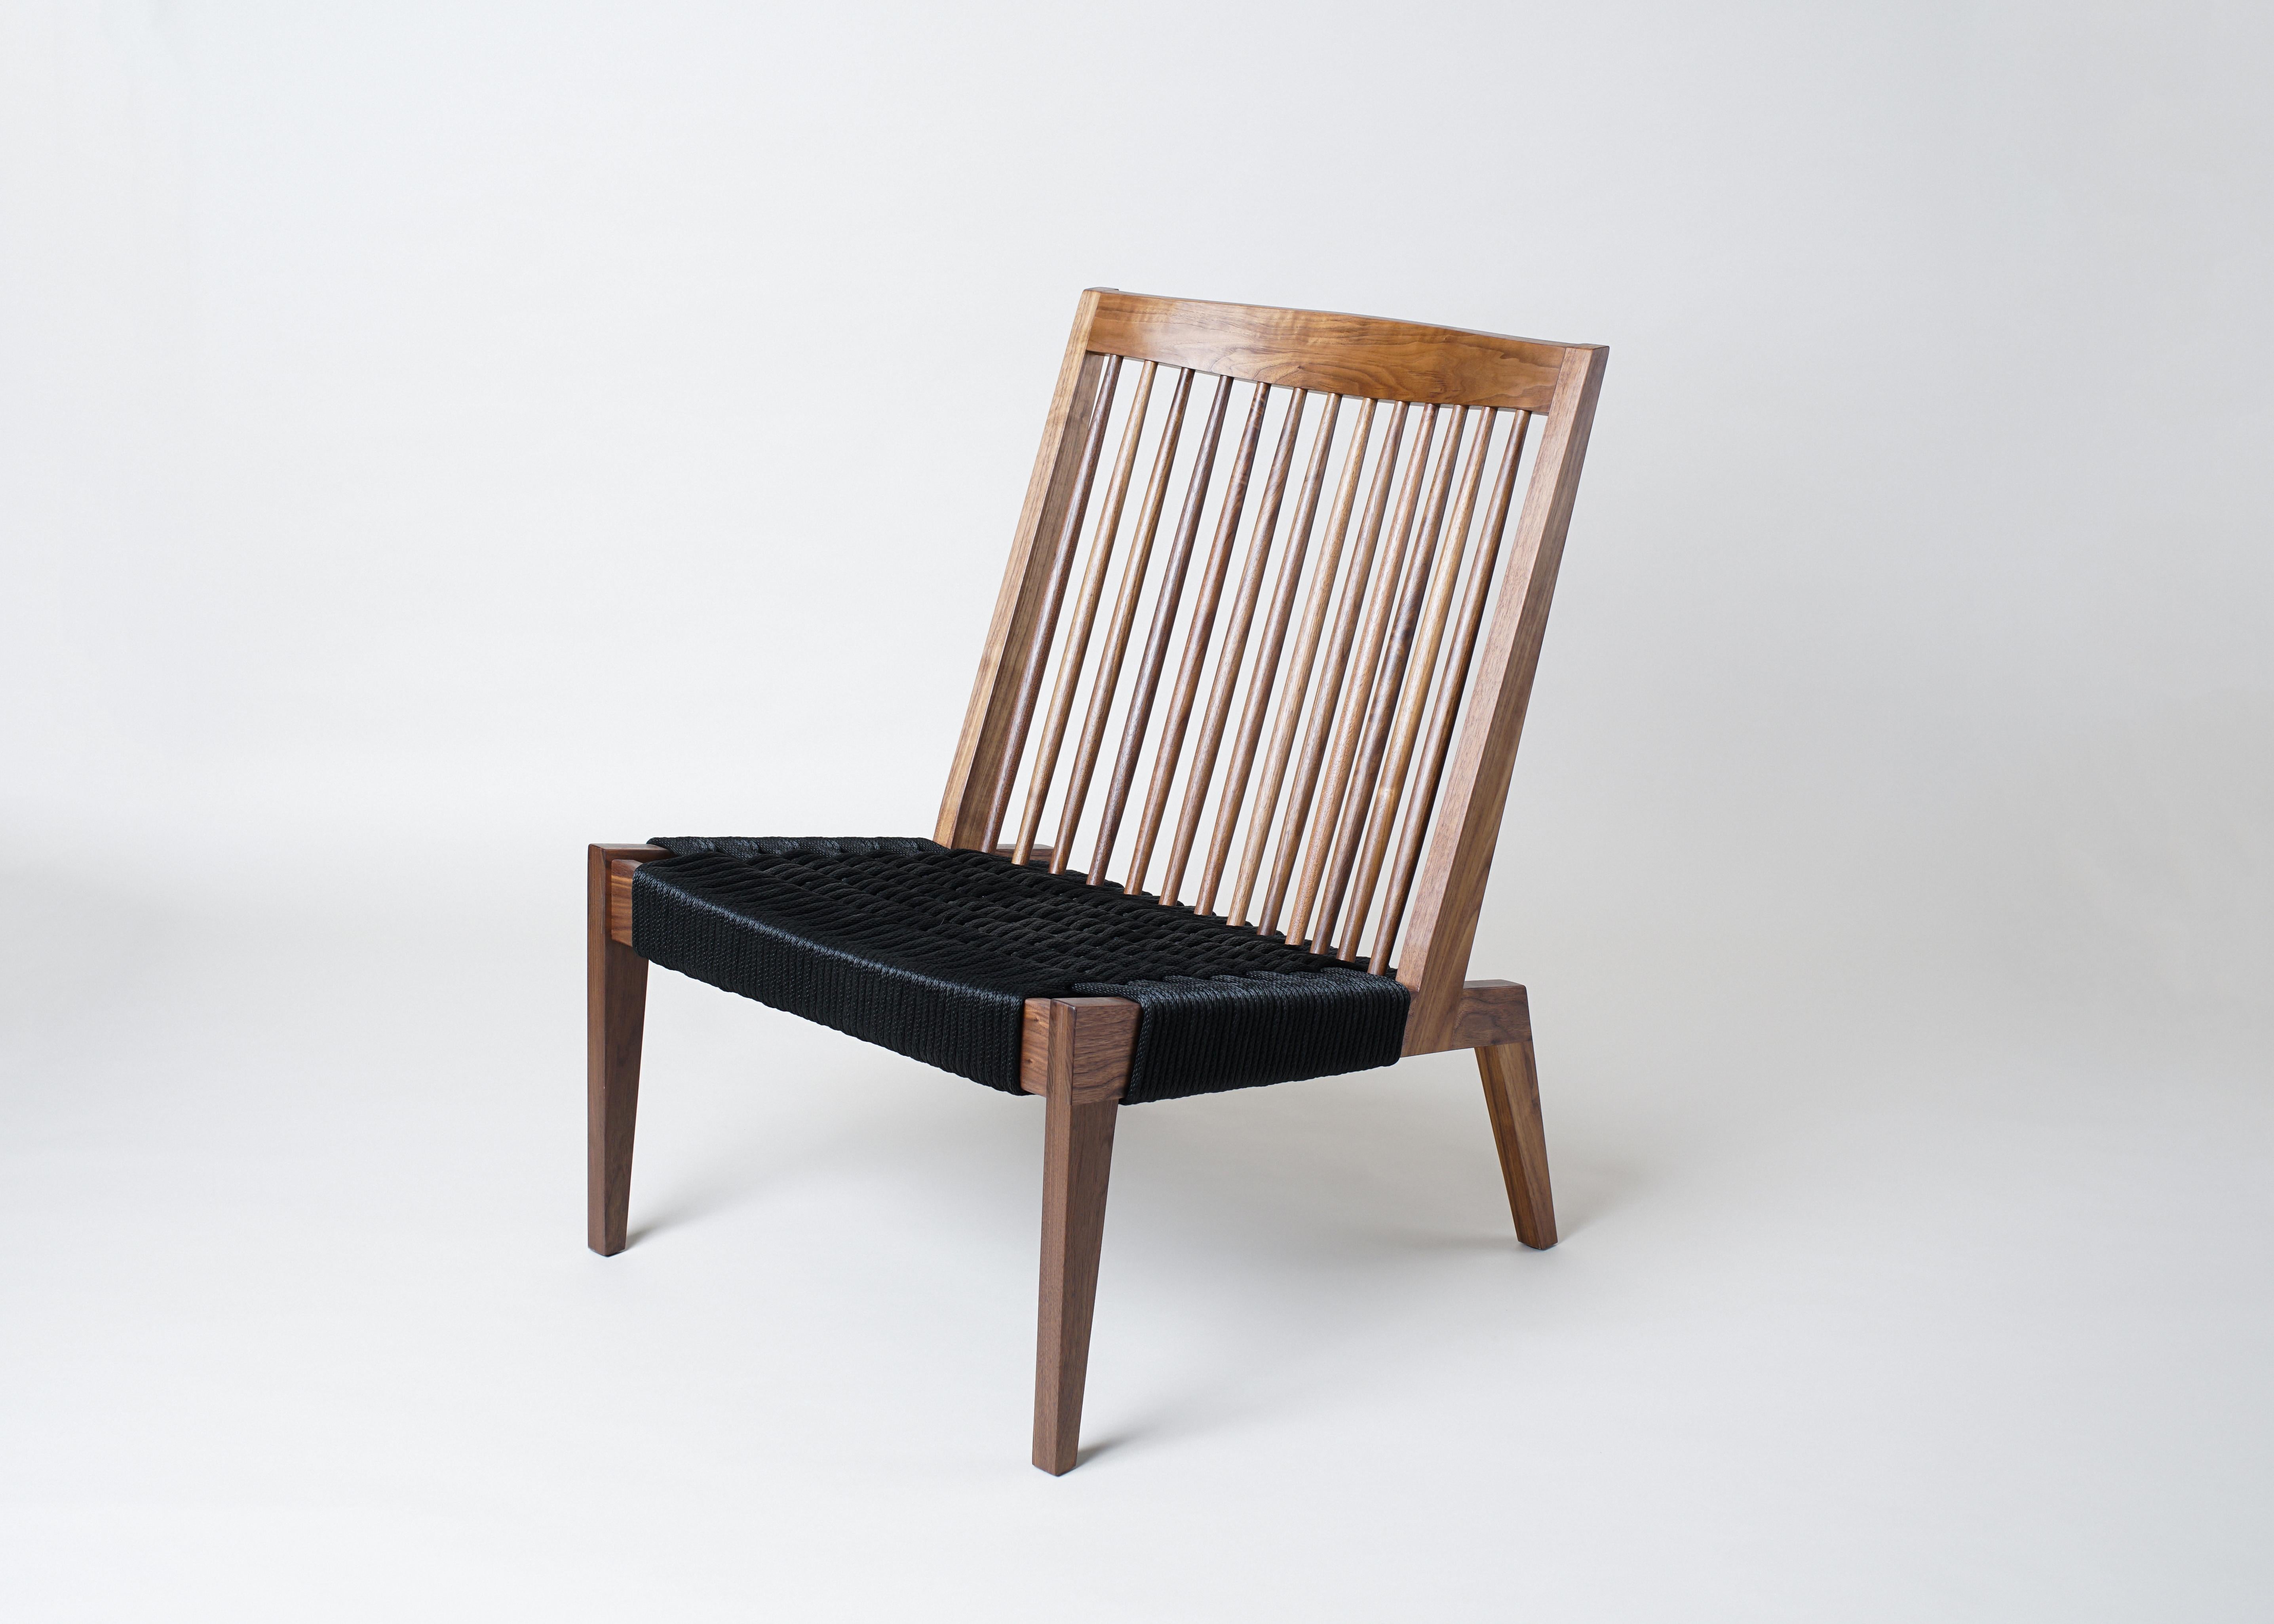 With a high spindle back and handcrafted bridle joinery clearly displayed, the Swift Easy Chair frame is studio favorite. Each Swift is a complex build for a skilled craftsperson: the exposed joinery alone can be heavy lift for any gifted